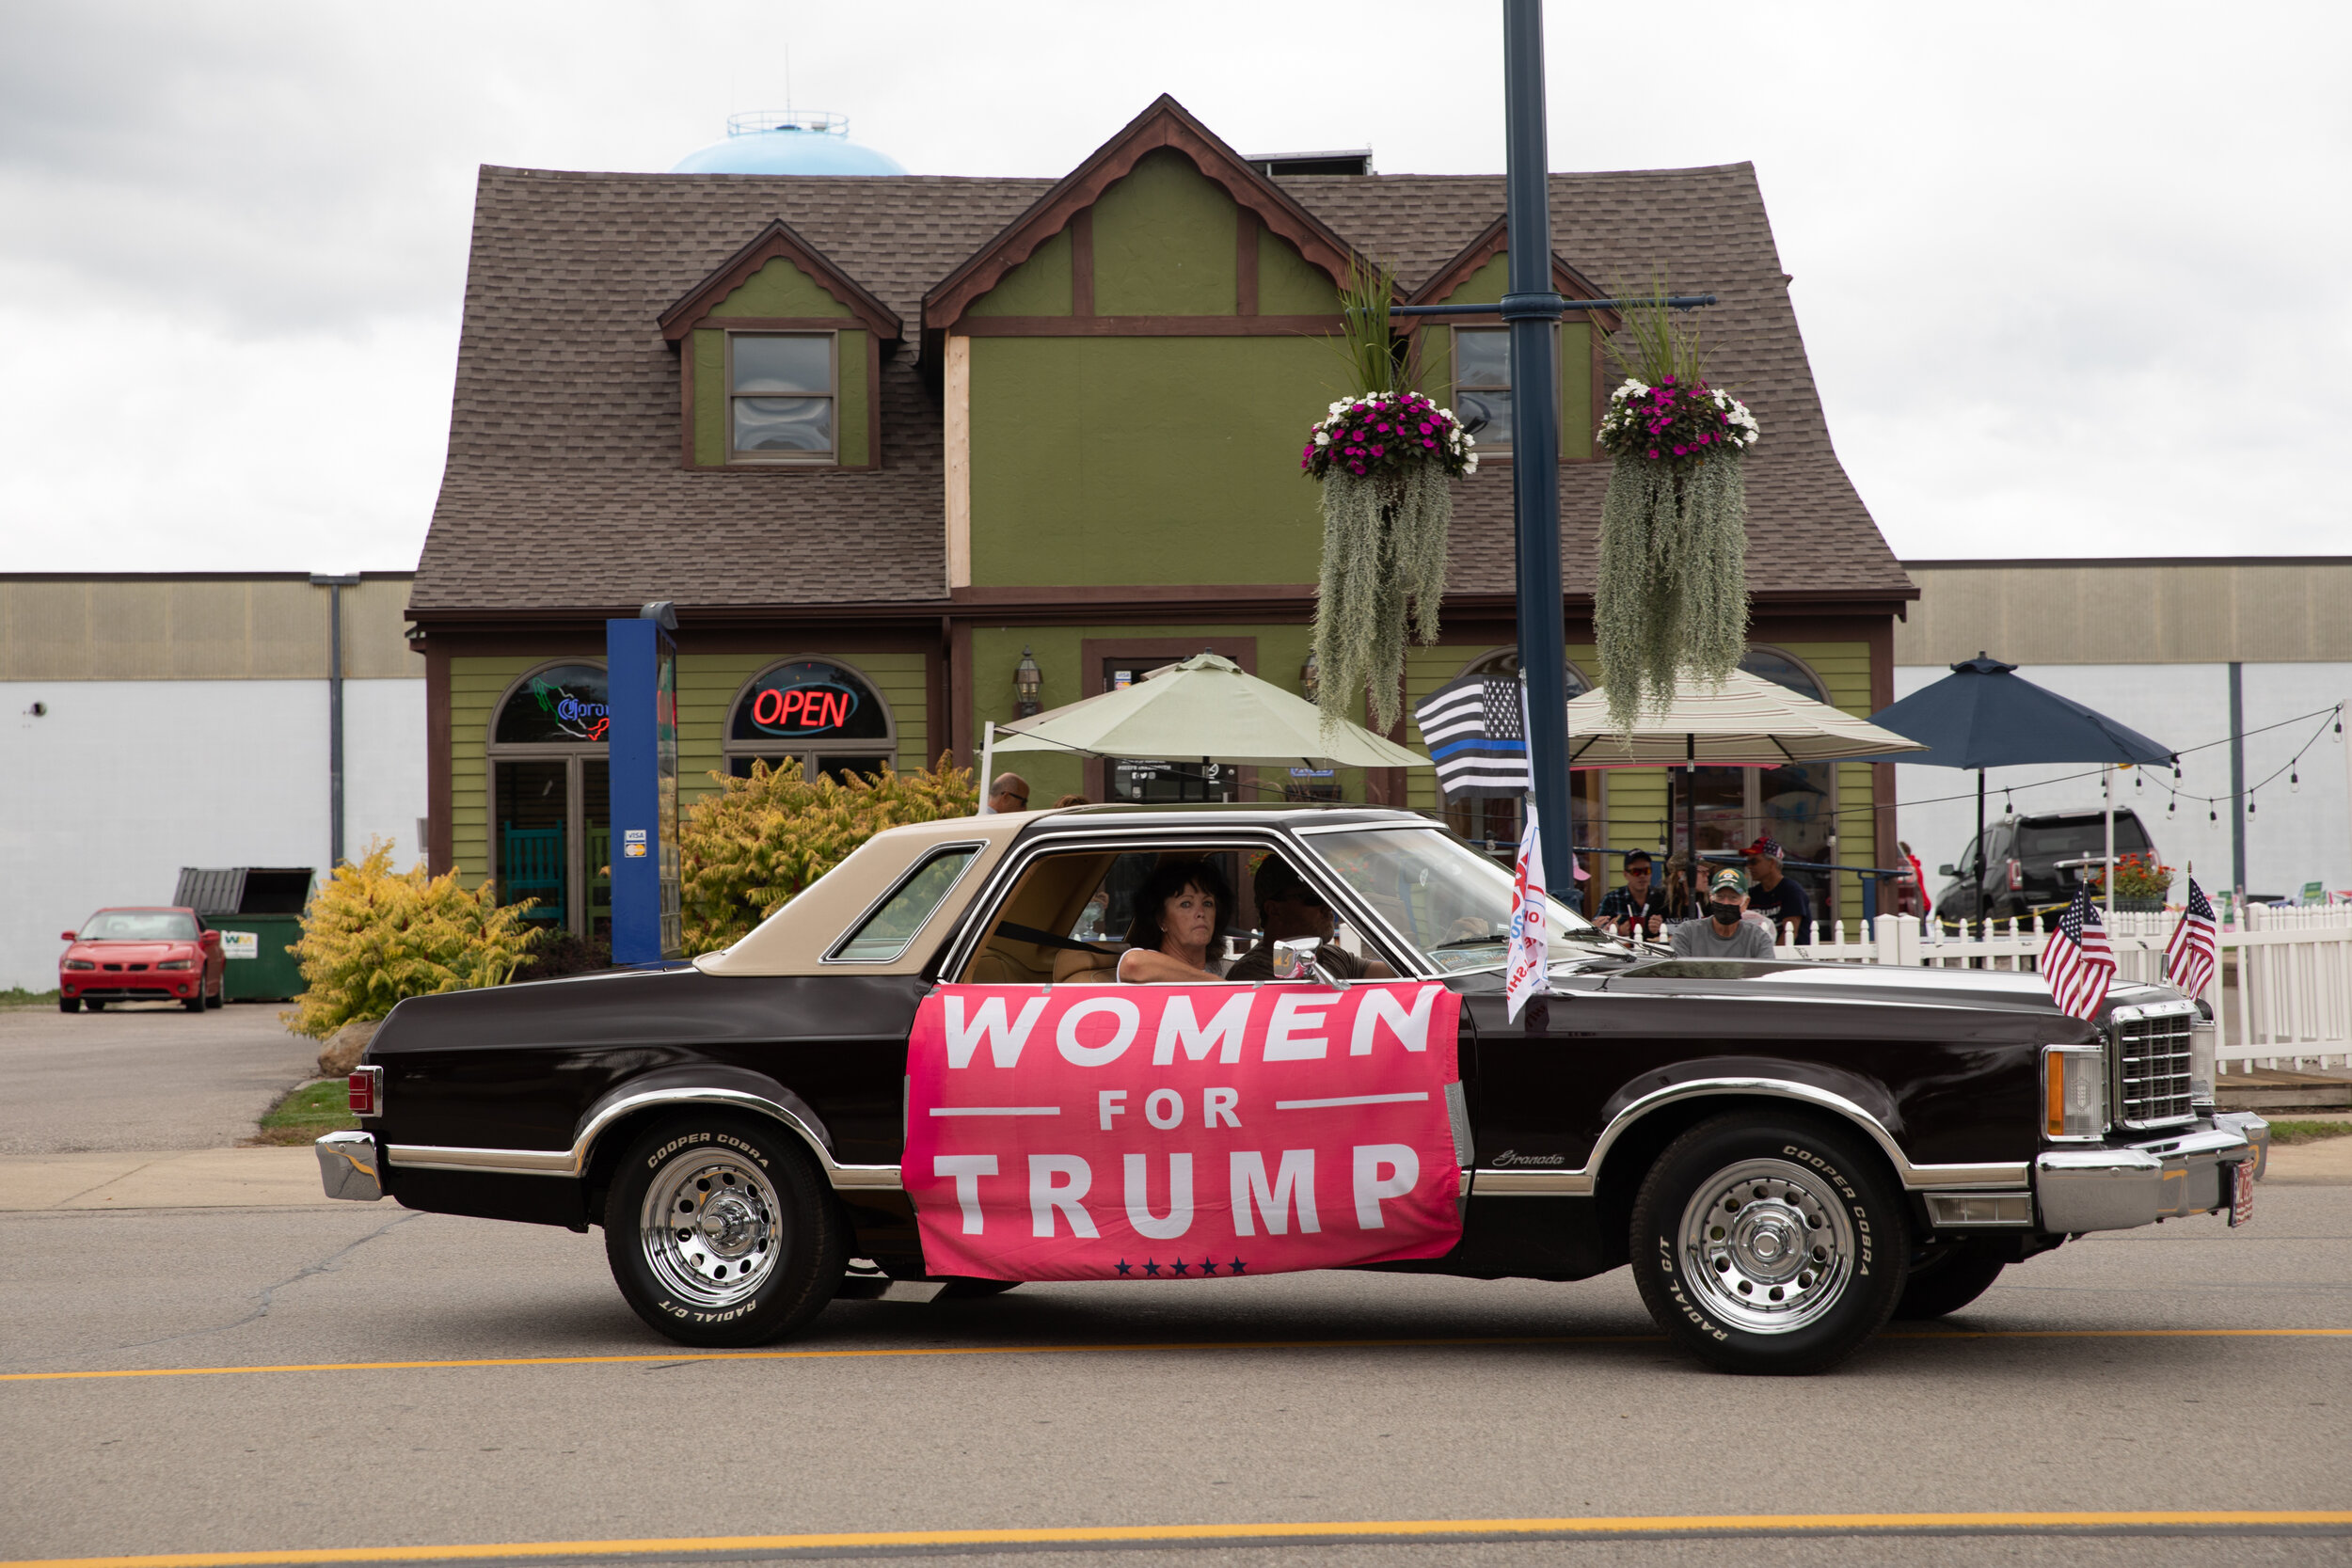  People take part in a classic car cruise in support of U.S. President Donald Trump and law enforcement in Frankenmuth, Michigan, U.S., September 13, 2020. (Emily Elconin for Reuters) 